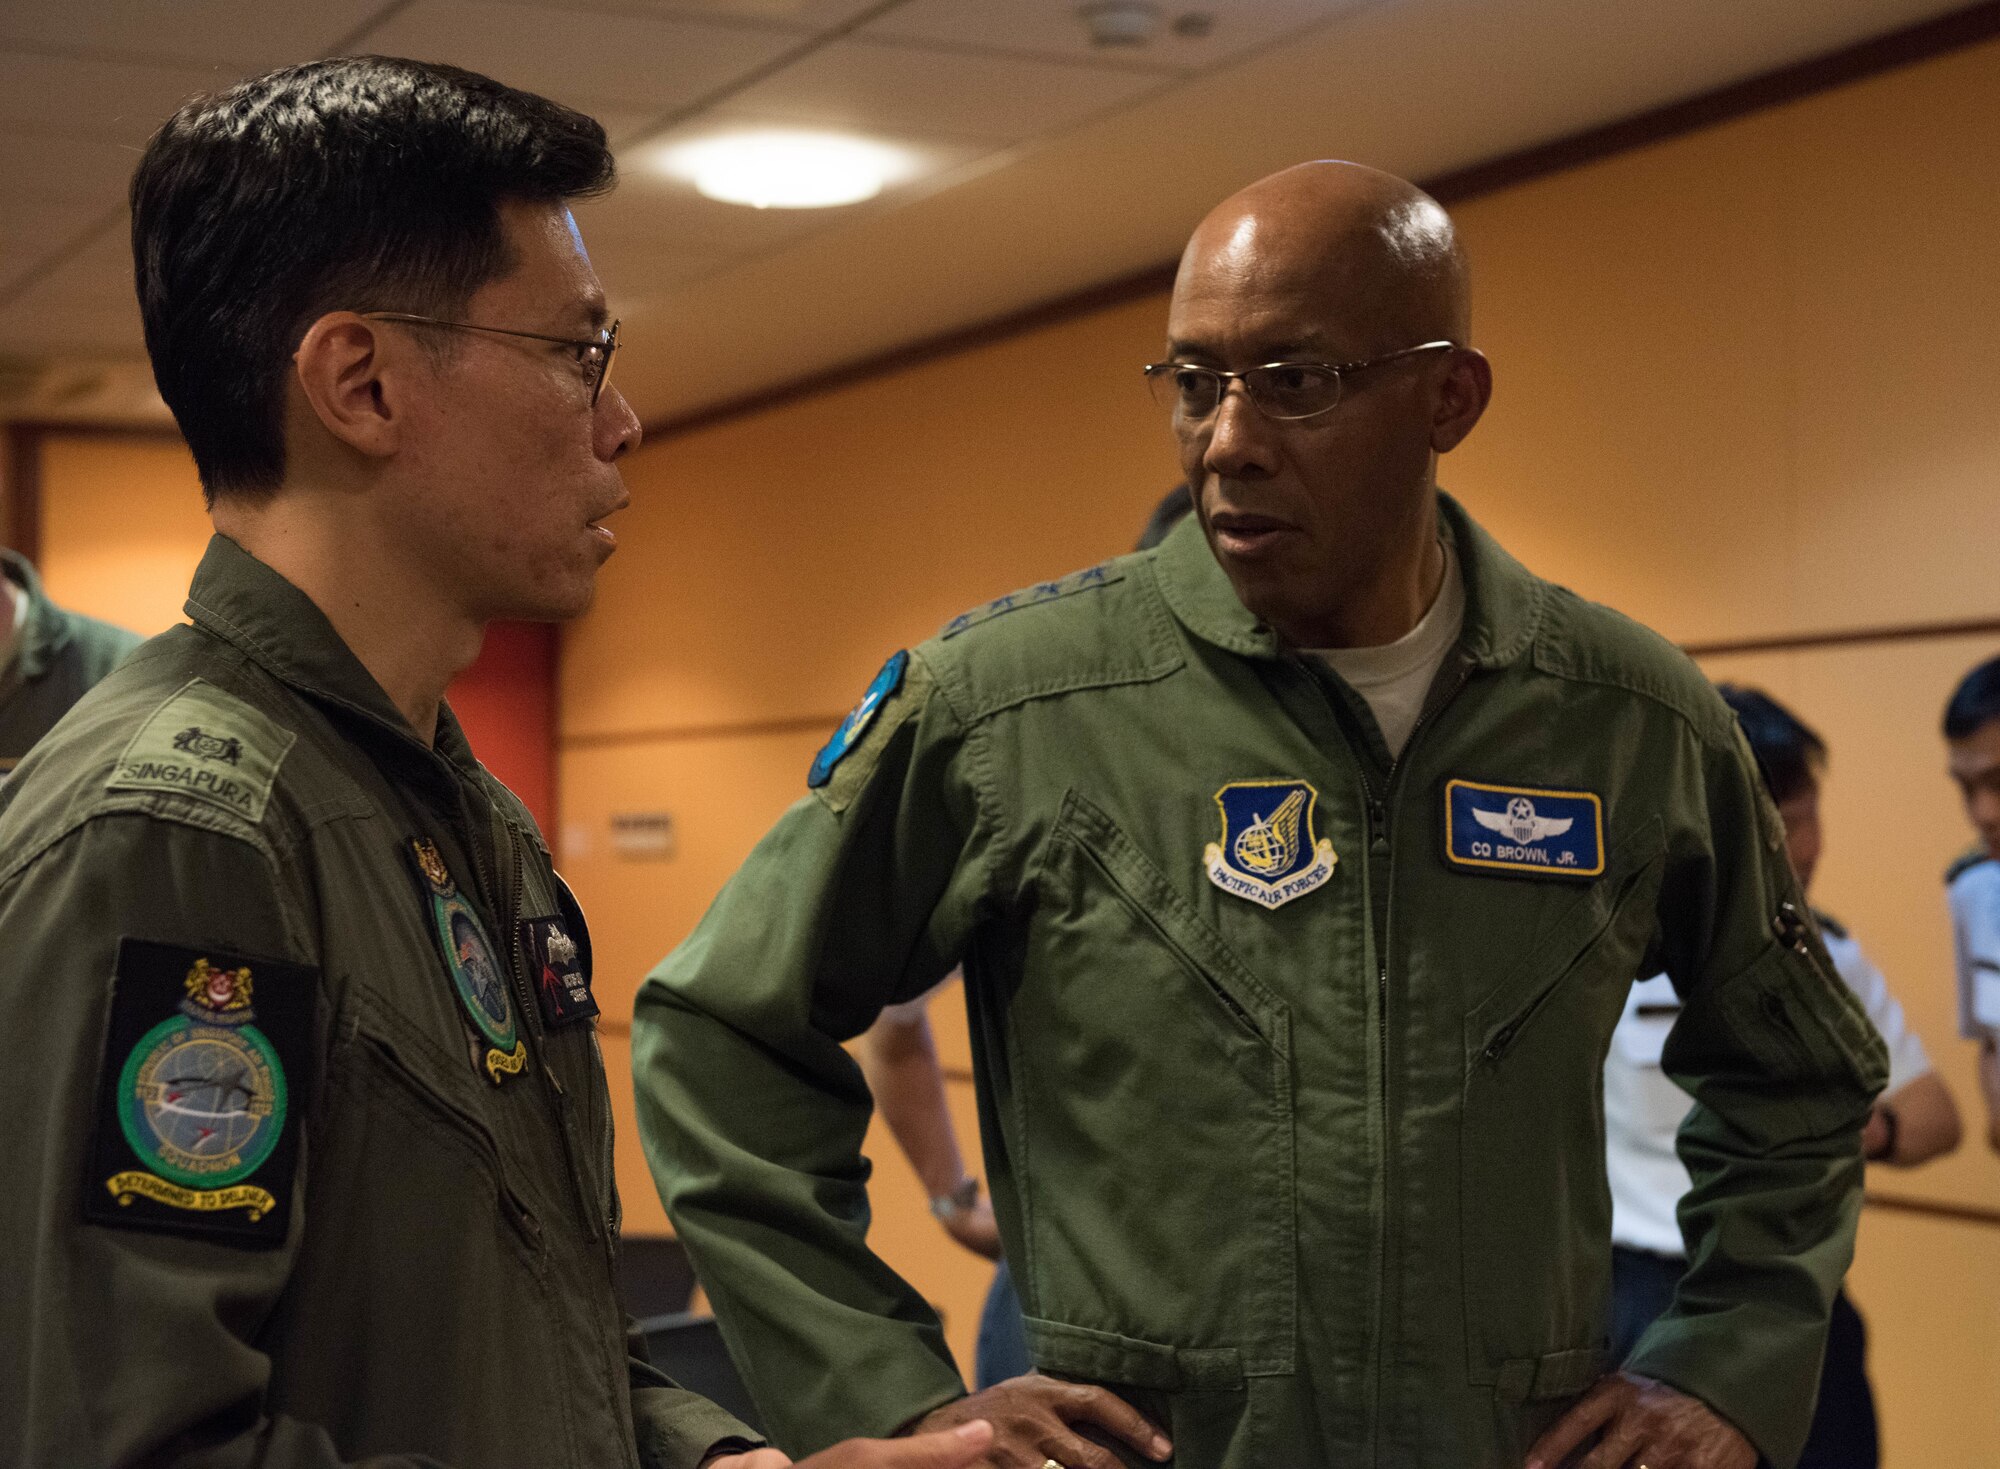 U.S. Air Force Gen. CQ Brown, Jr., Pacific Air Forces commander, talks with a member of the Singapore Air Force during a visit to Changi Air Base, Singapore, March 19, 2019.